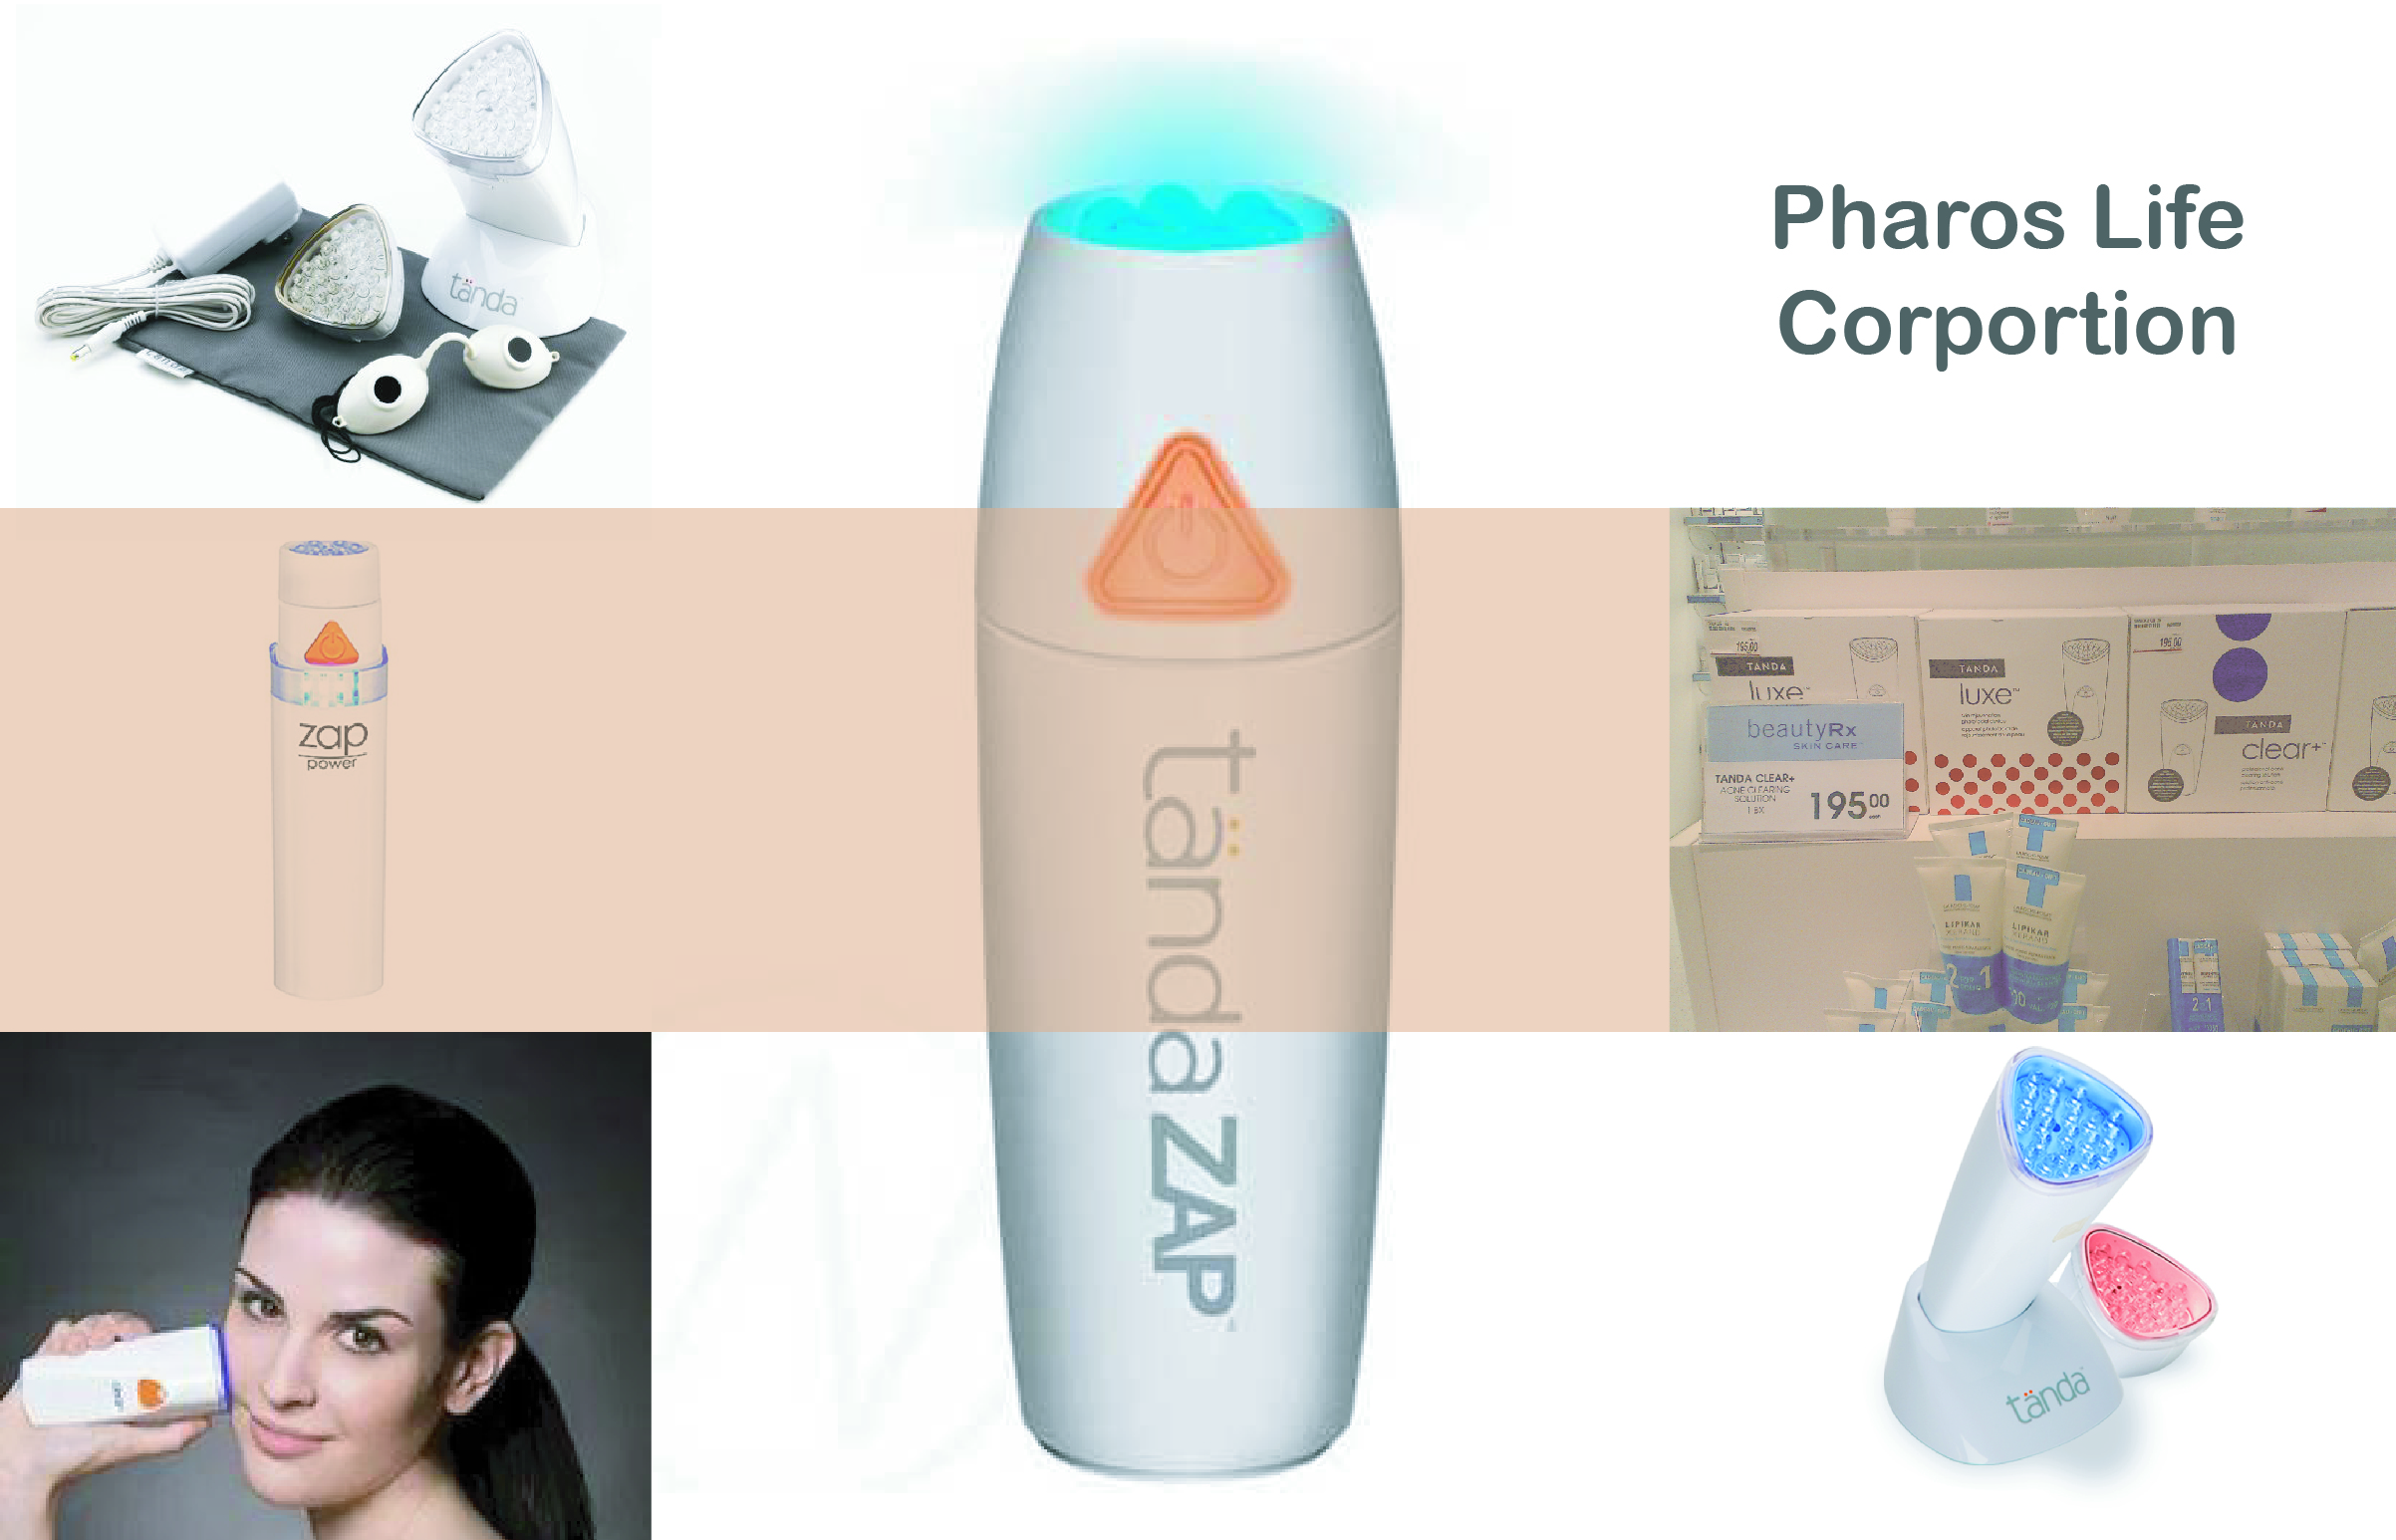 Consumer light therapy products